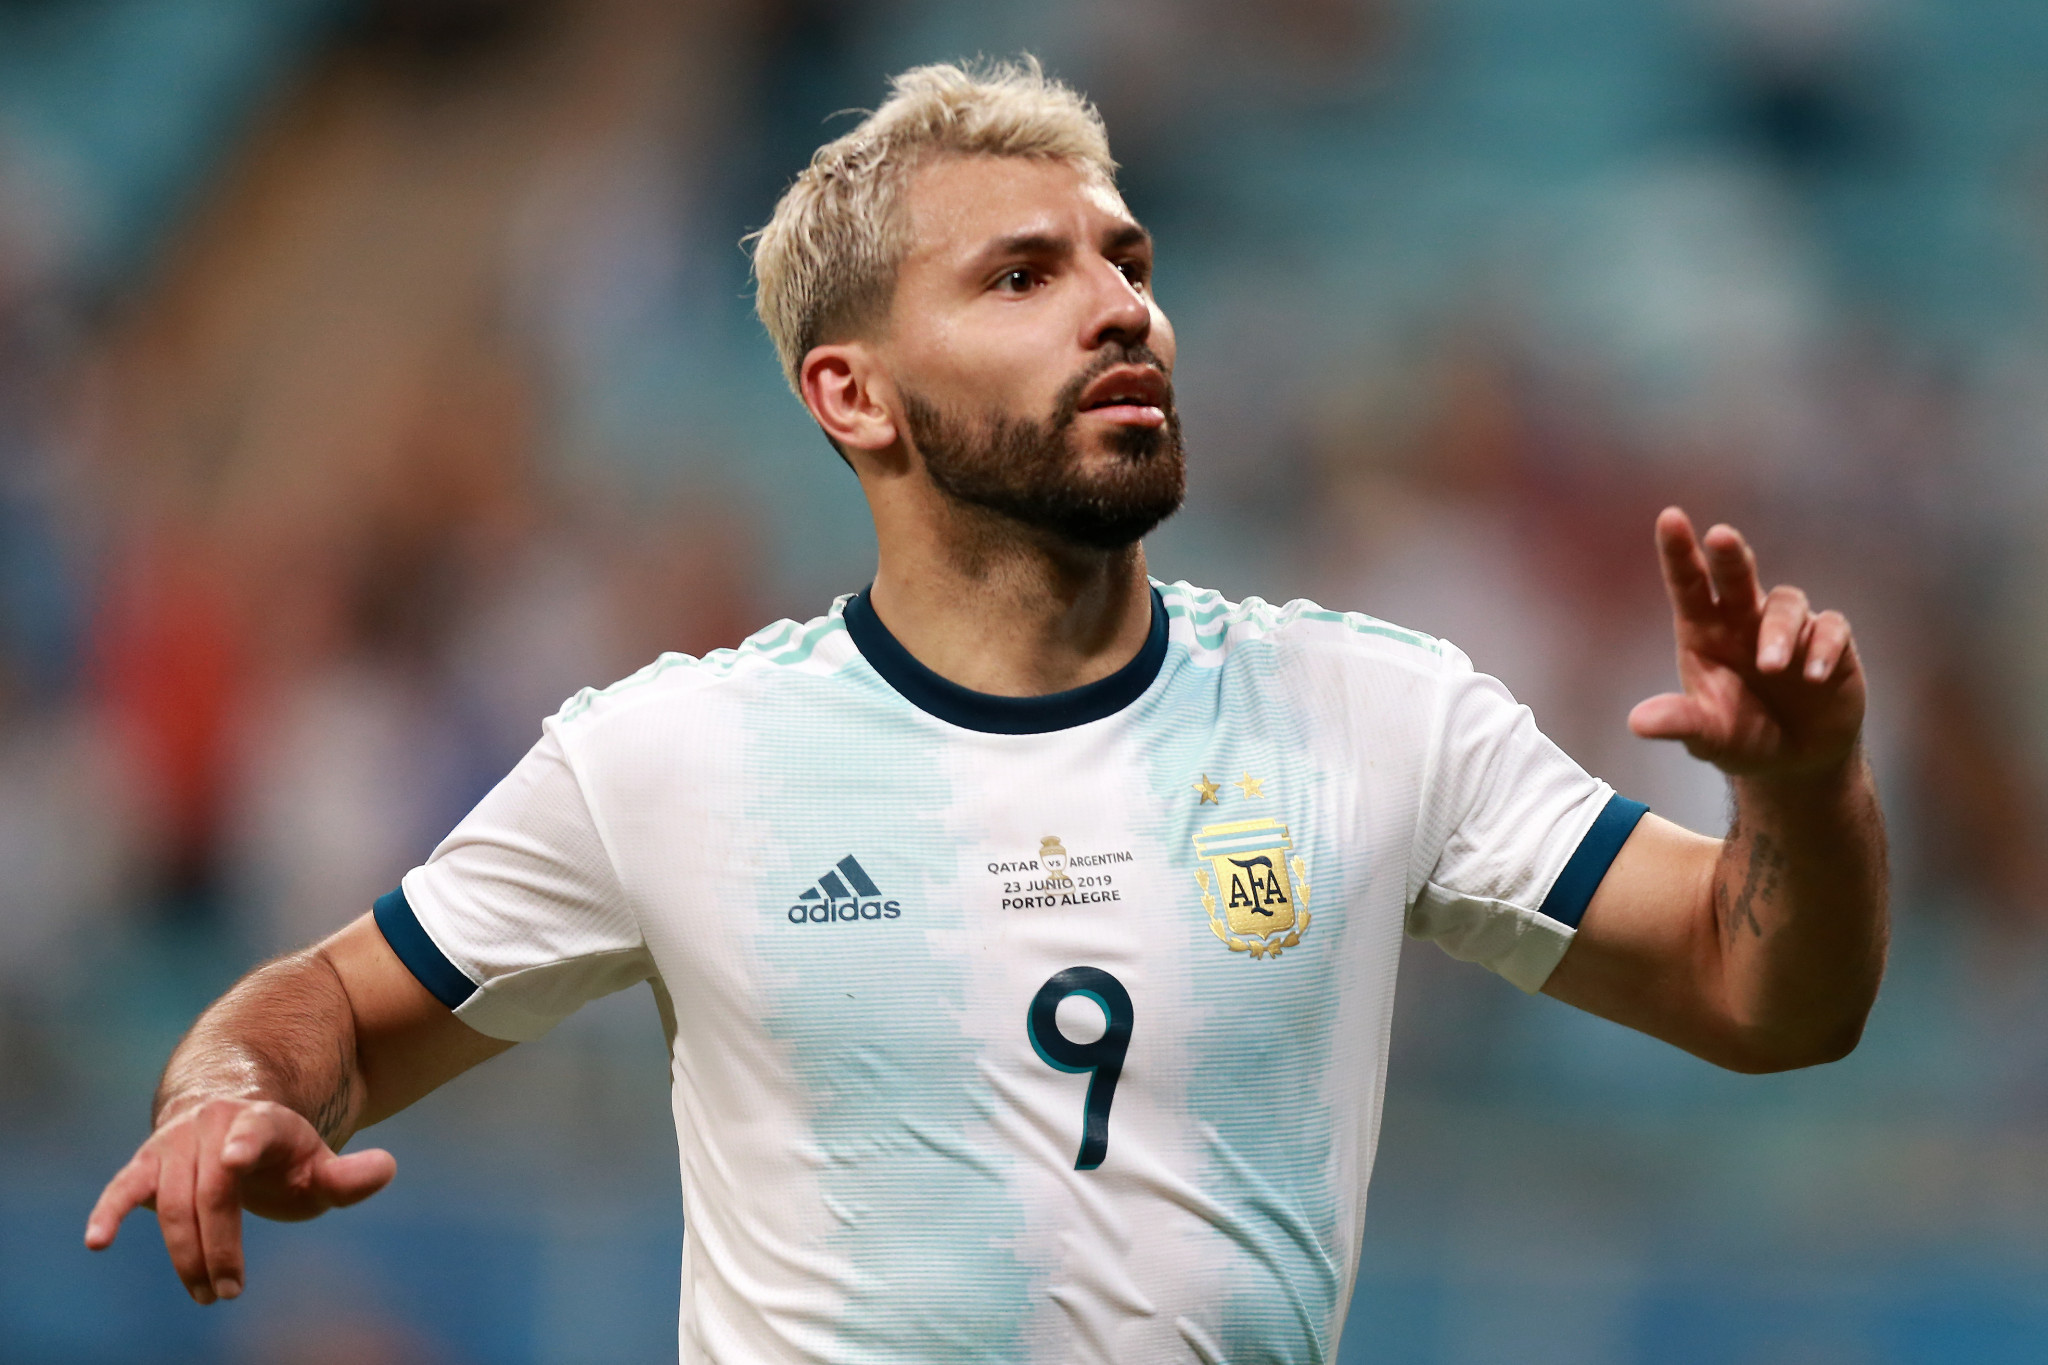 Sergio Agüero scored as Argentina defeated Qatar 2-0 at the Copa América ©Getty Images